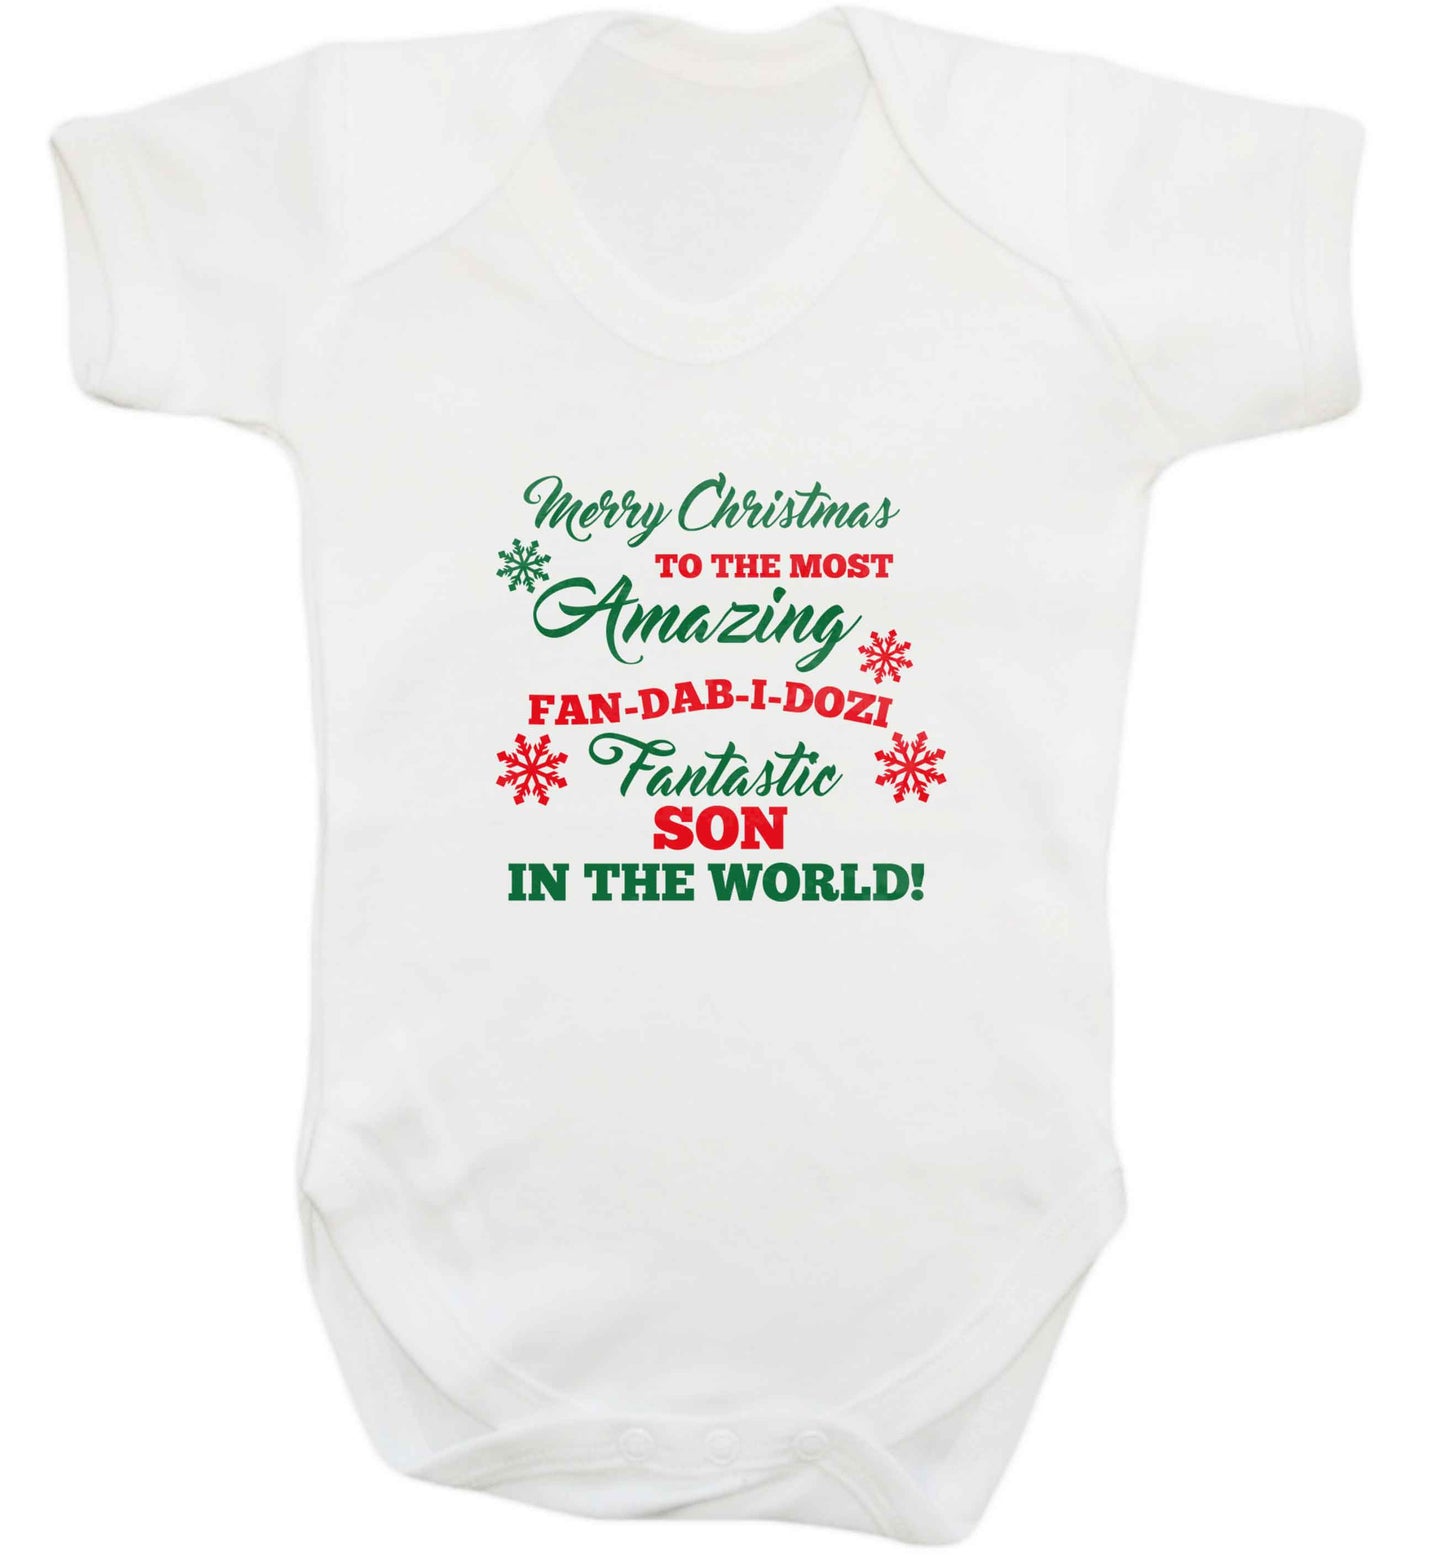 Merry Christmas to the most amazing fan-dab-i-dozi fantasic Son in the world baby vest white 18-24 months